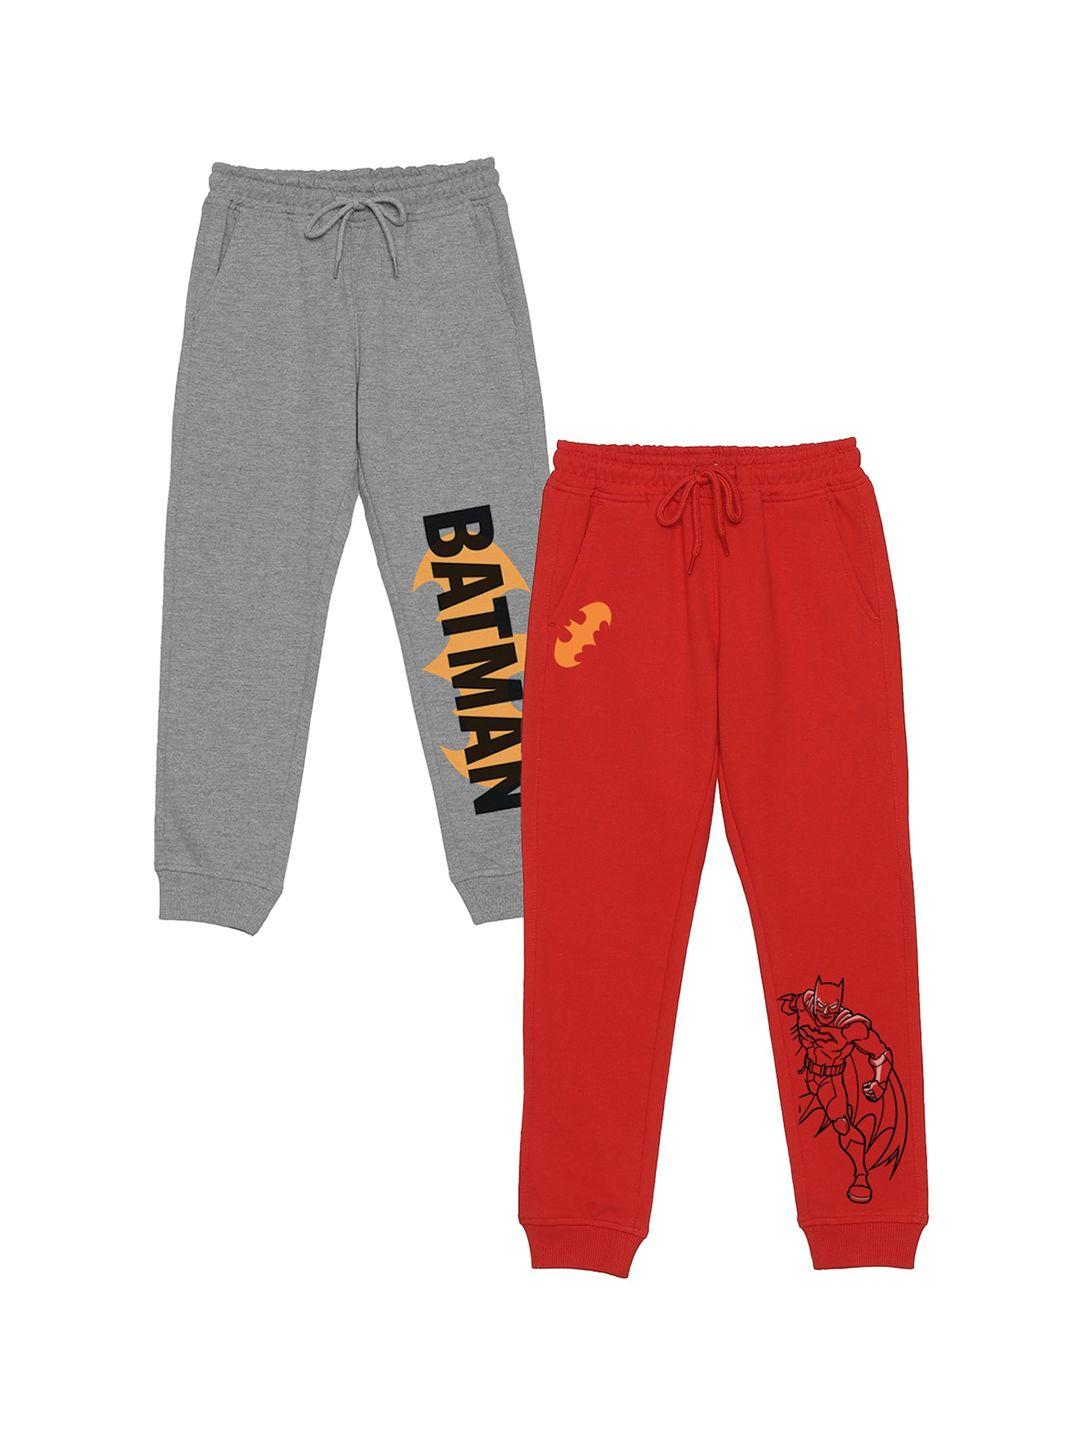 dc by wear your mind kids pack of 2 printed cotton joggers